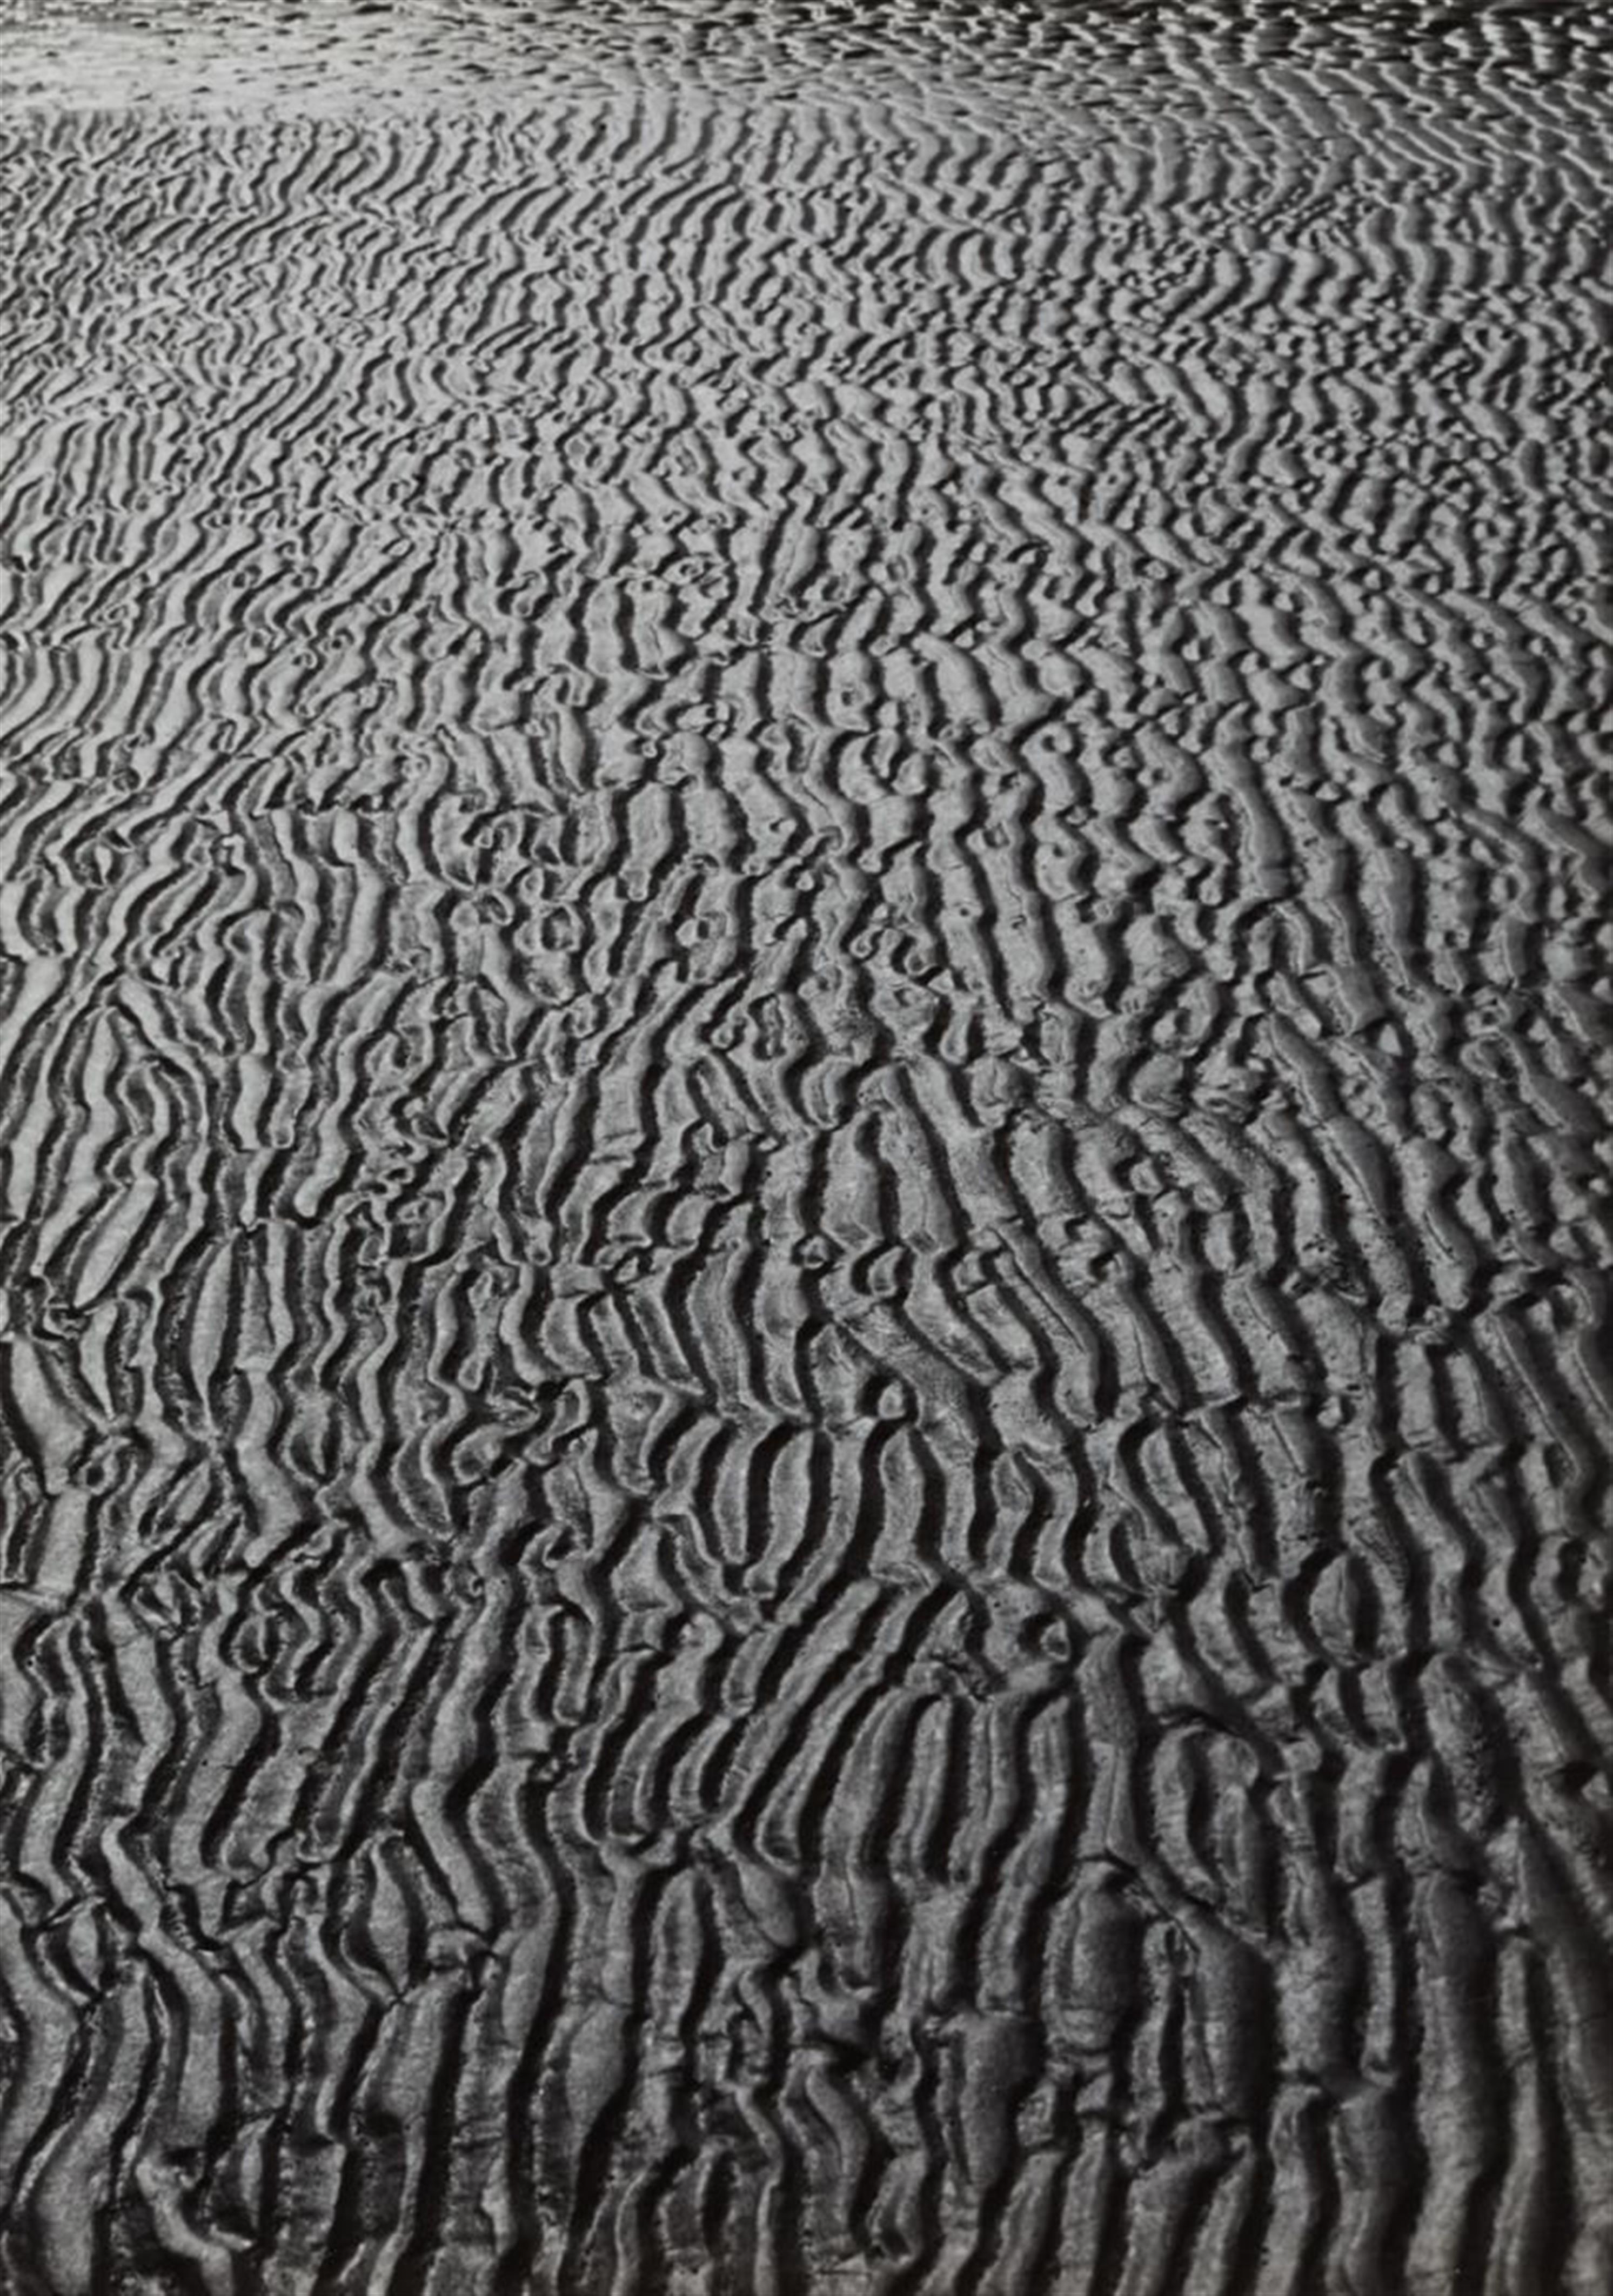 Alfred Ehrhardt - Untitled (from the series: Das Watt [The Wadden Sea]) - image-1